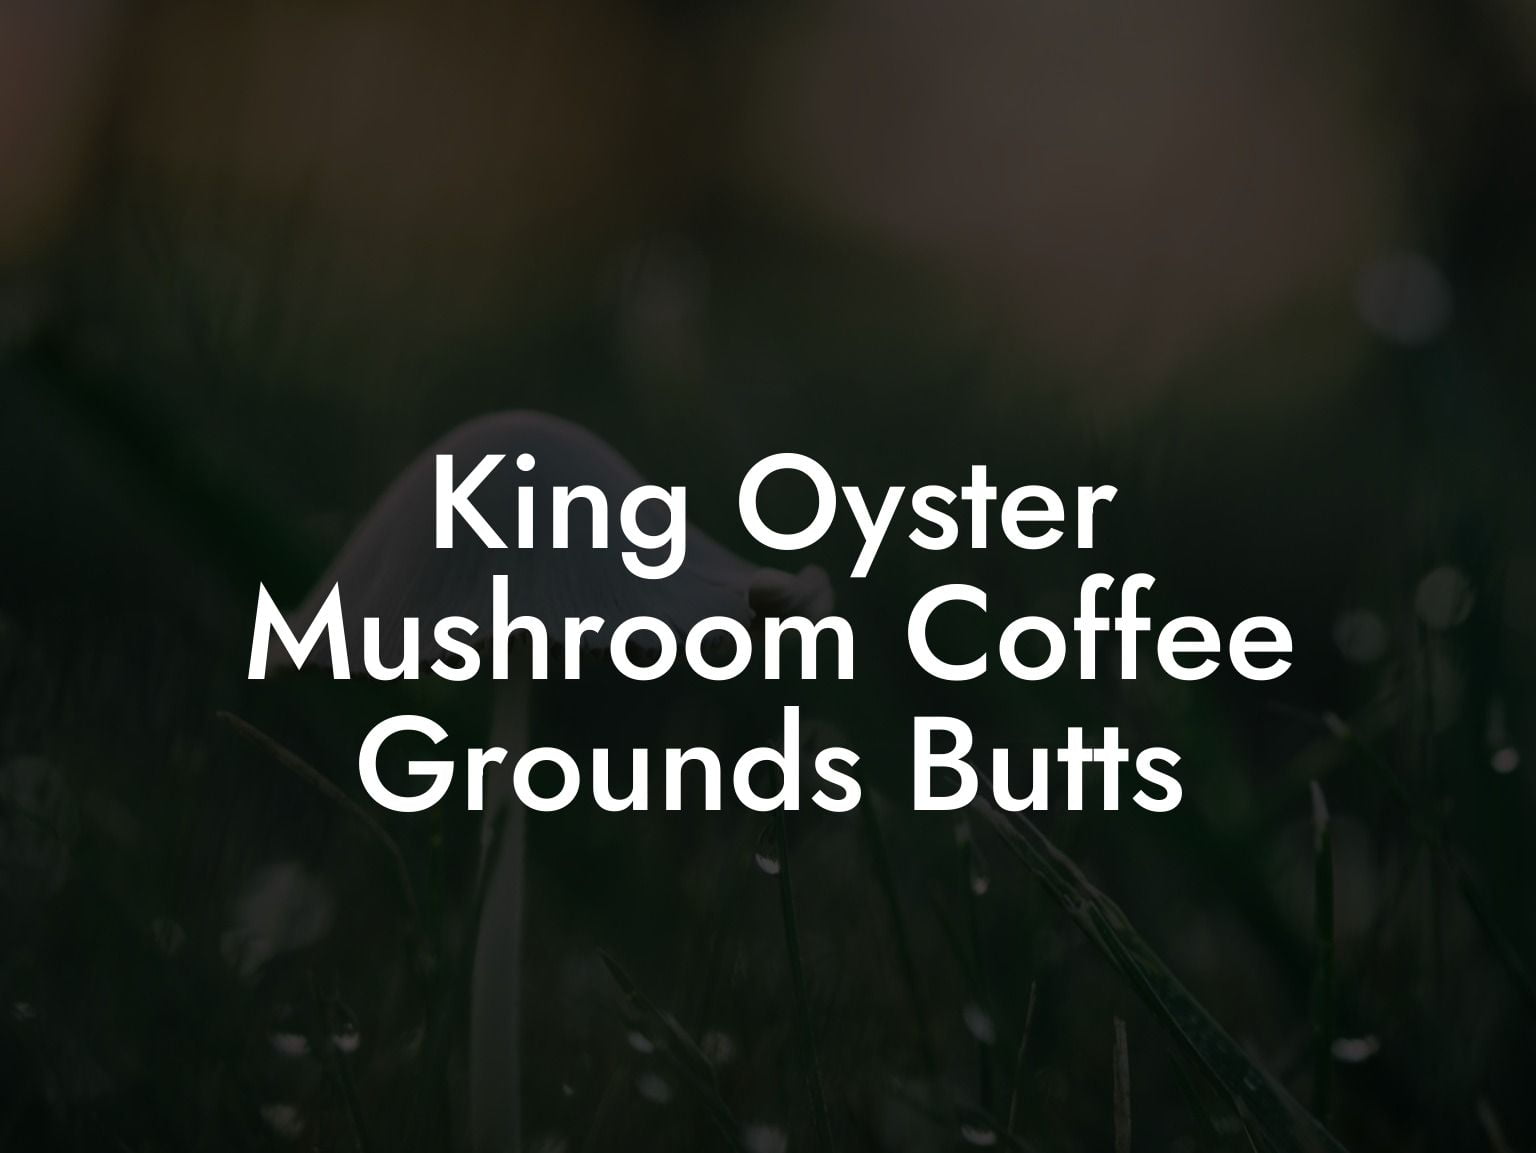 King Oyster Mushroom Coffee Grounds Butts